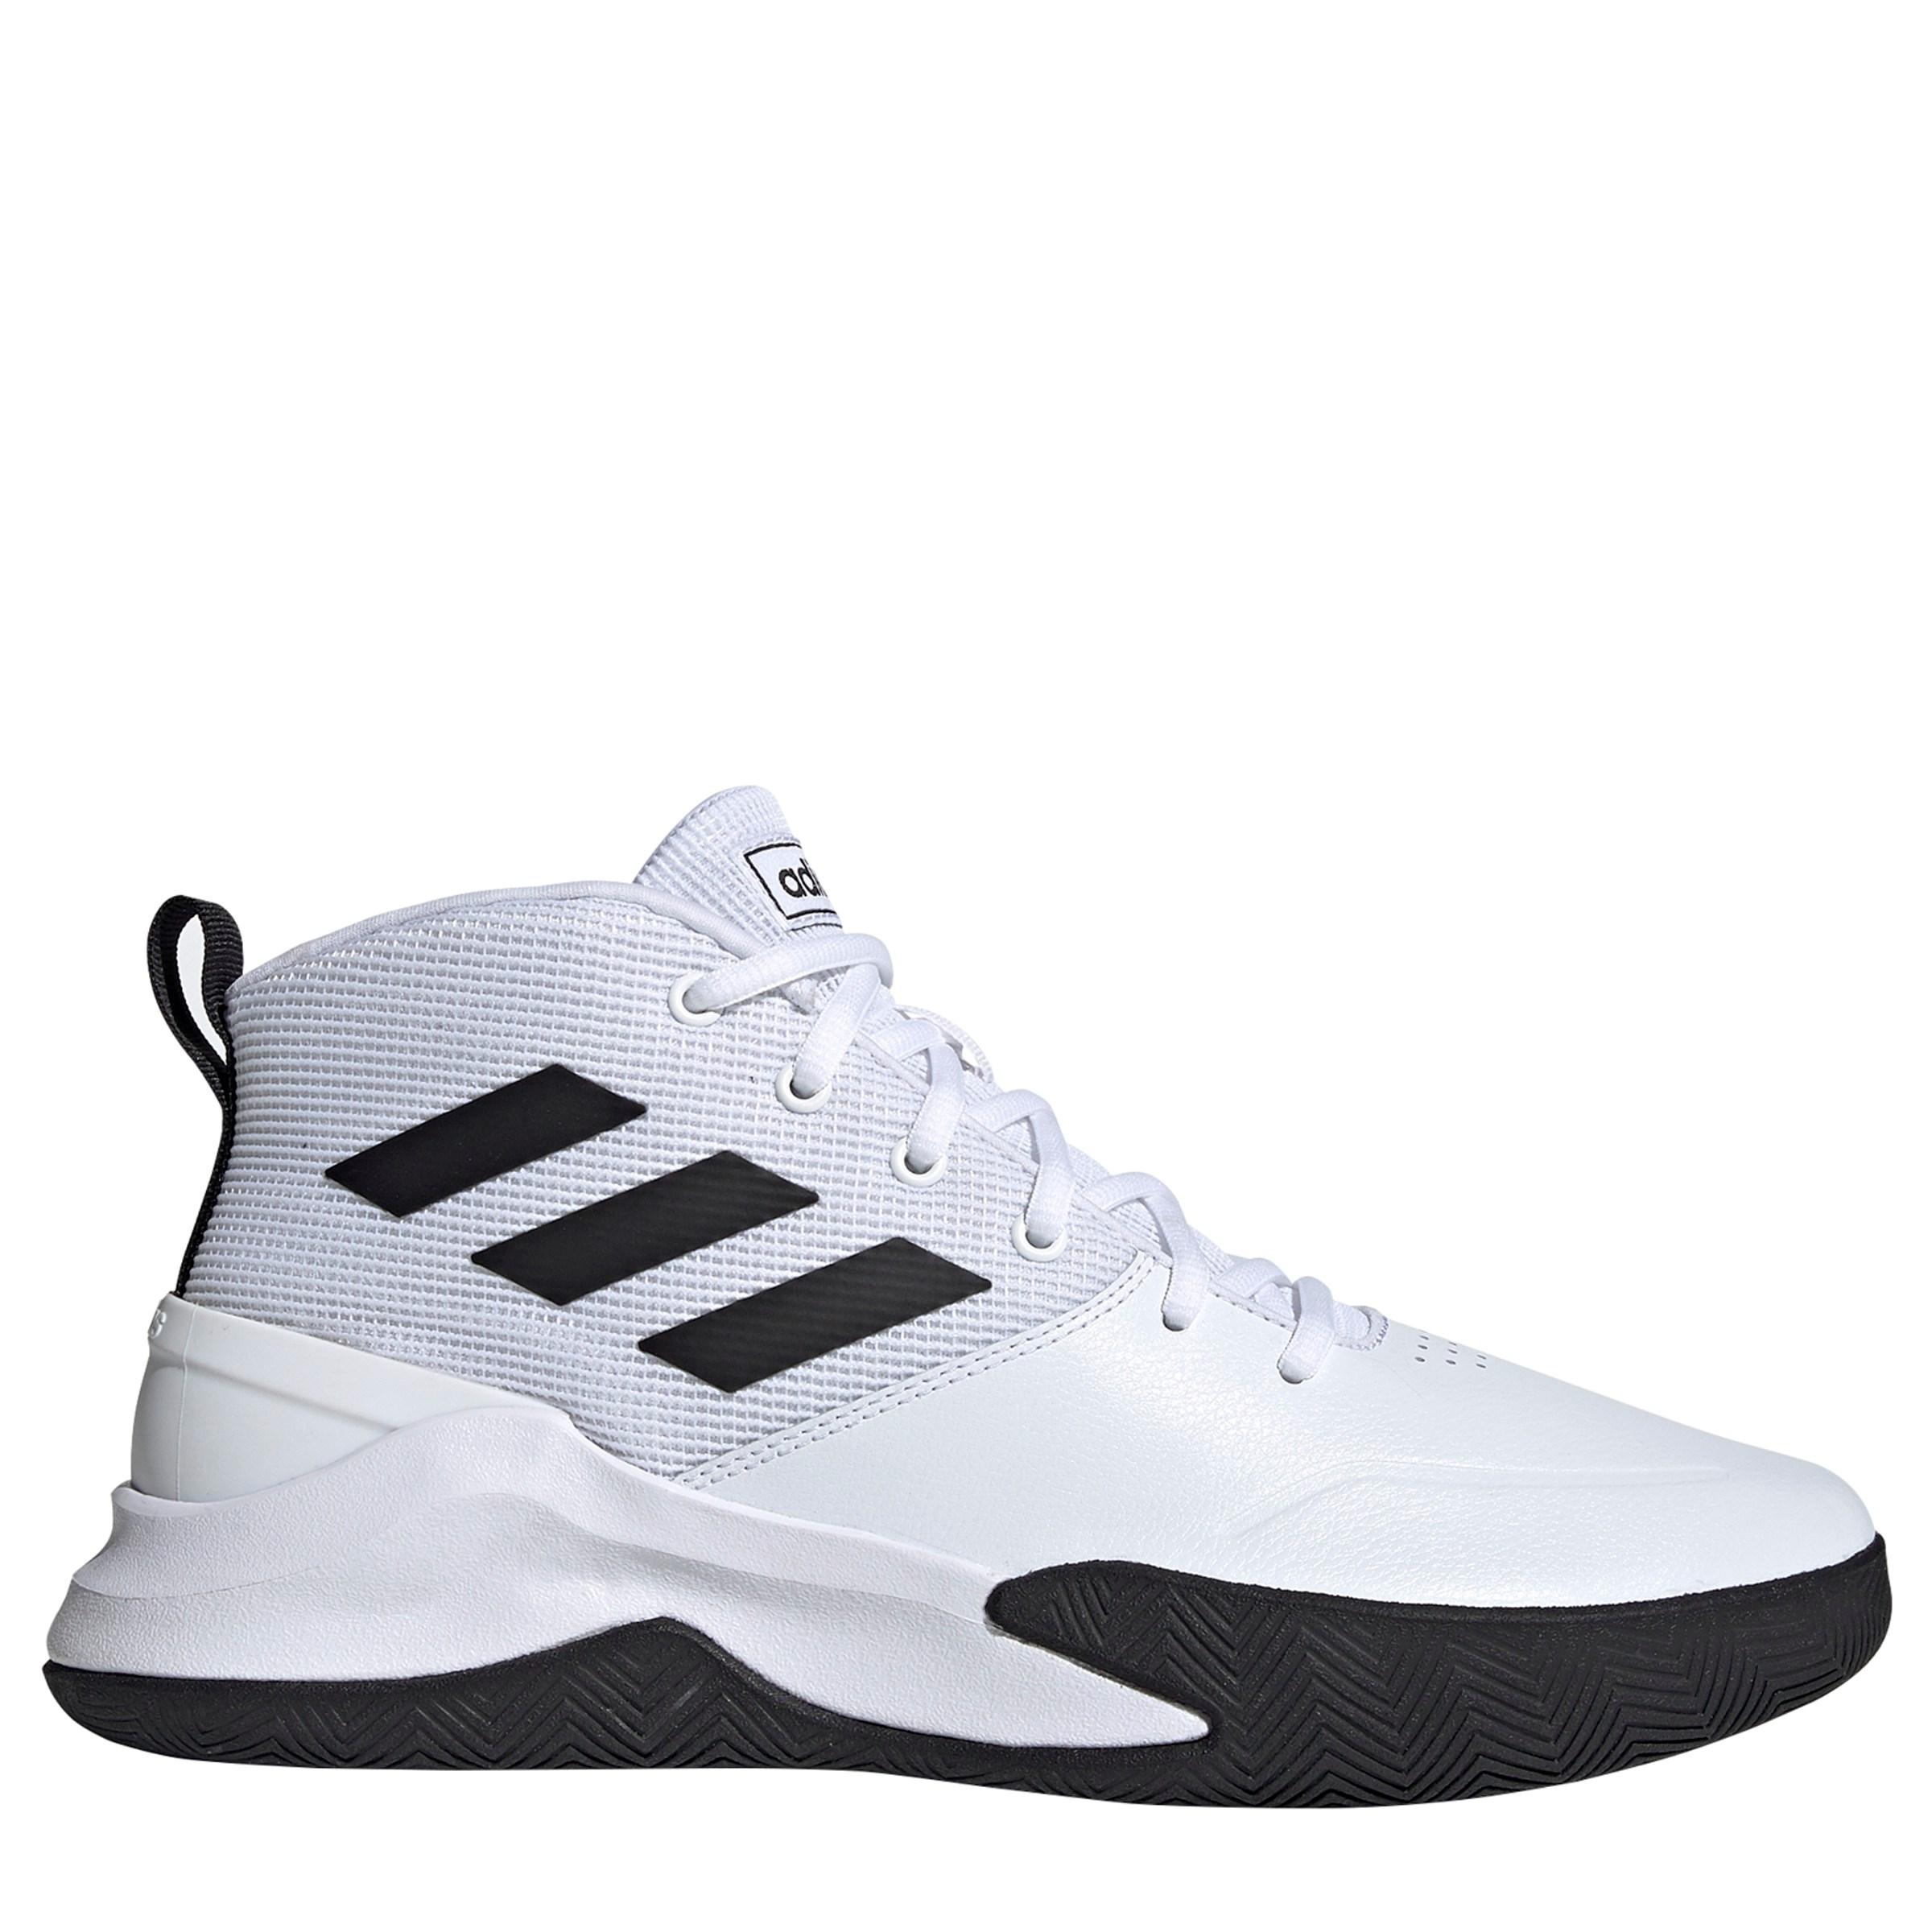 Are Adidas Basketball Shoes True To Size - Best Design Idea